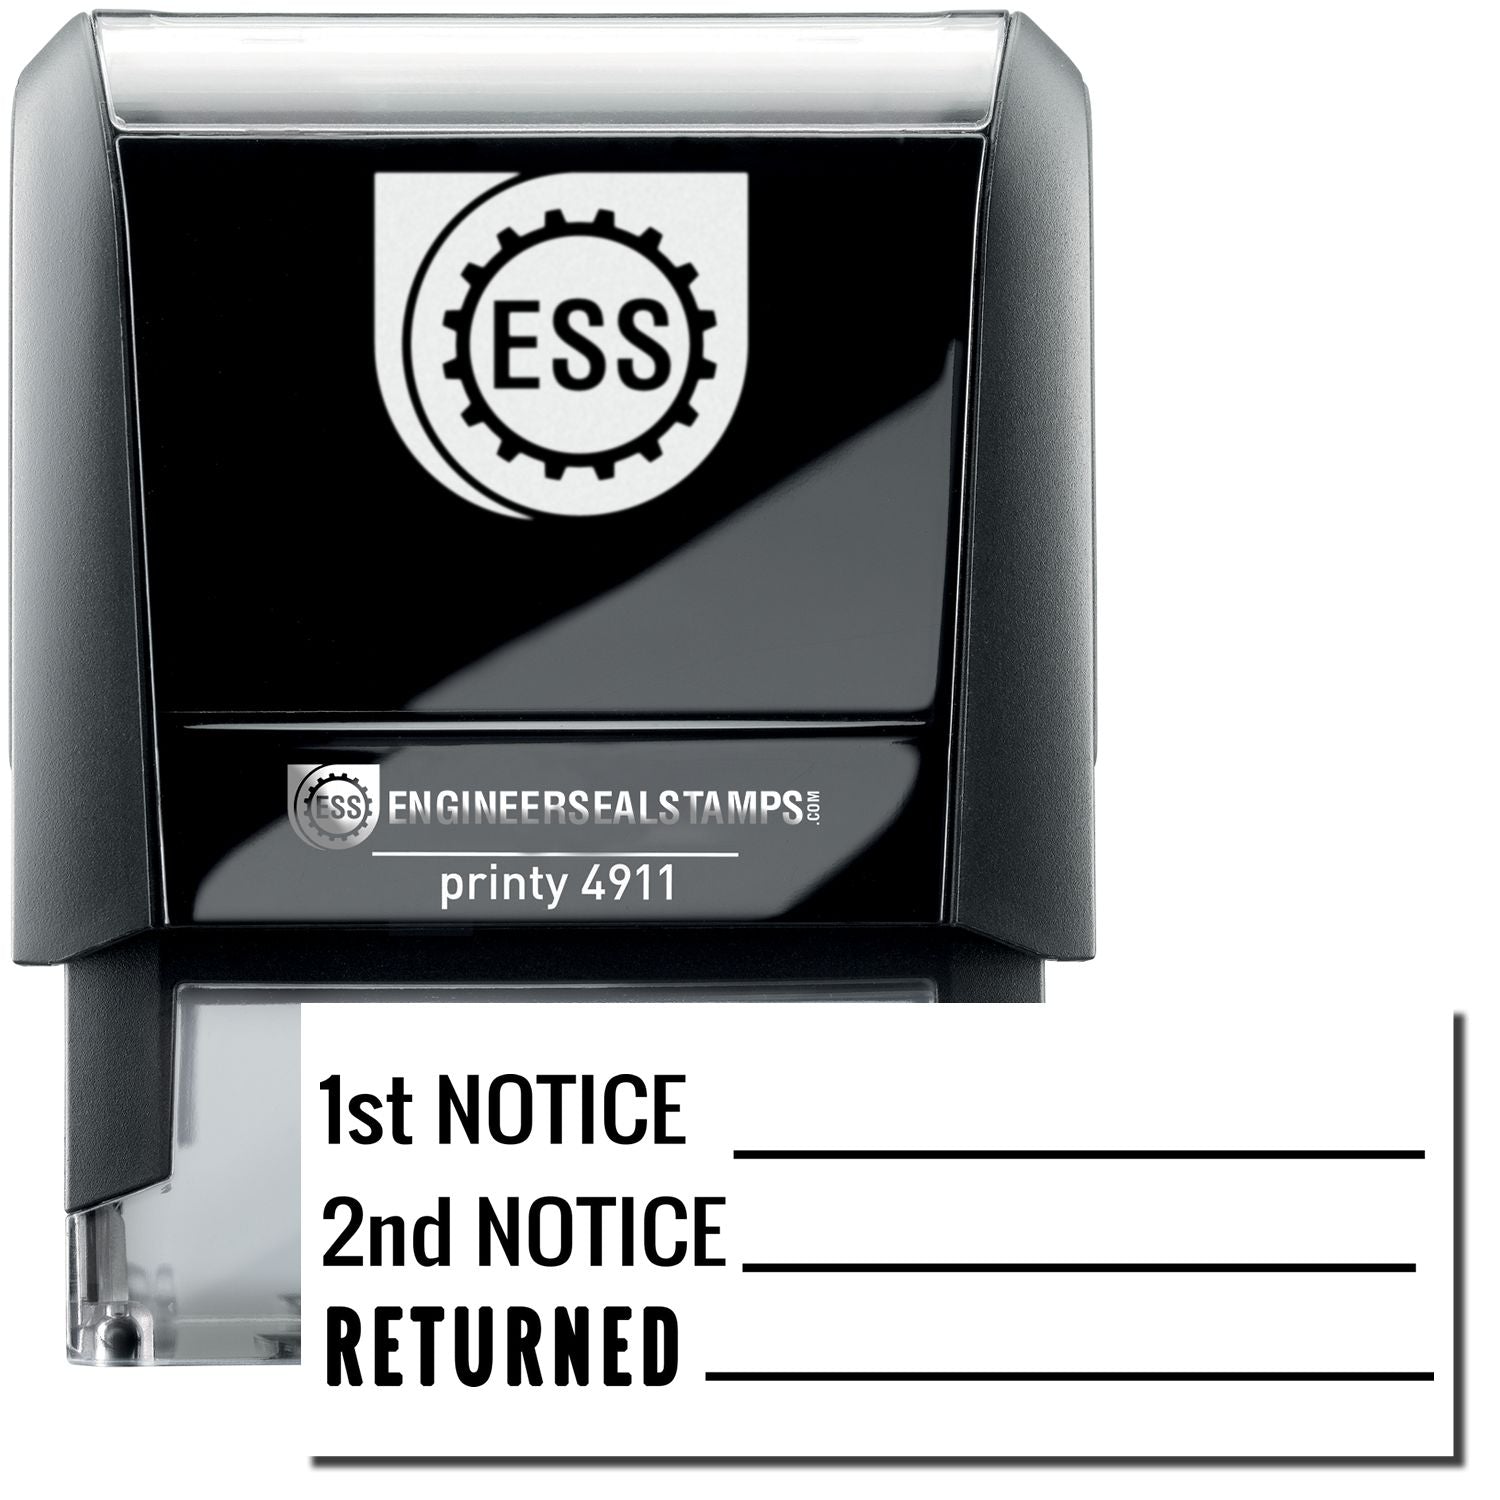 A self-inking stamp with a stamped image showing how the texts "1st NOTICE", "2nd NOTICE", and "RETURNED" with a line after each text is displayed after stamping.